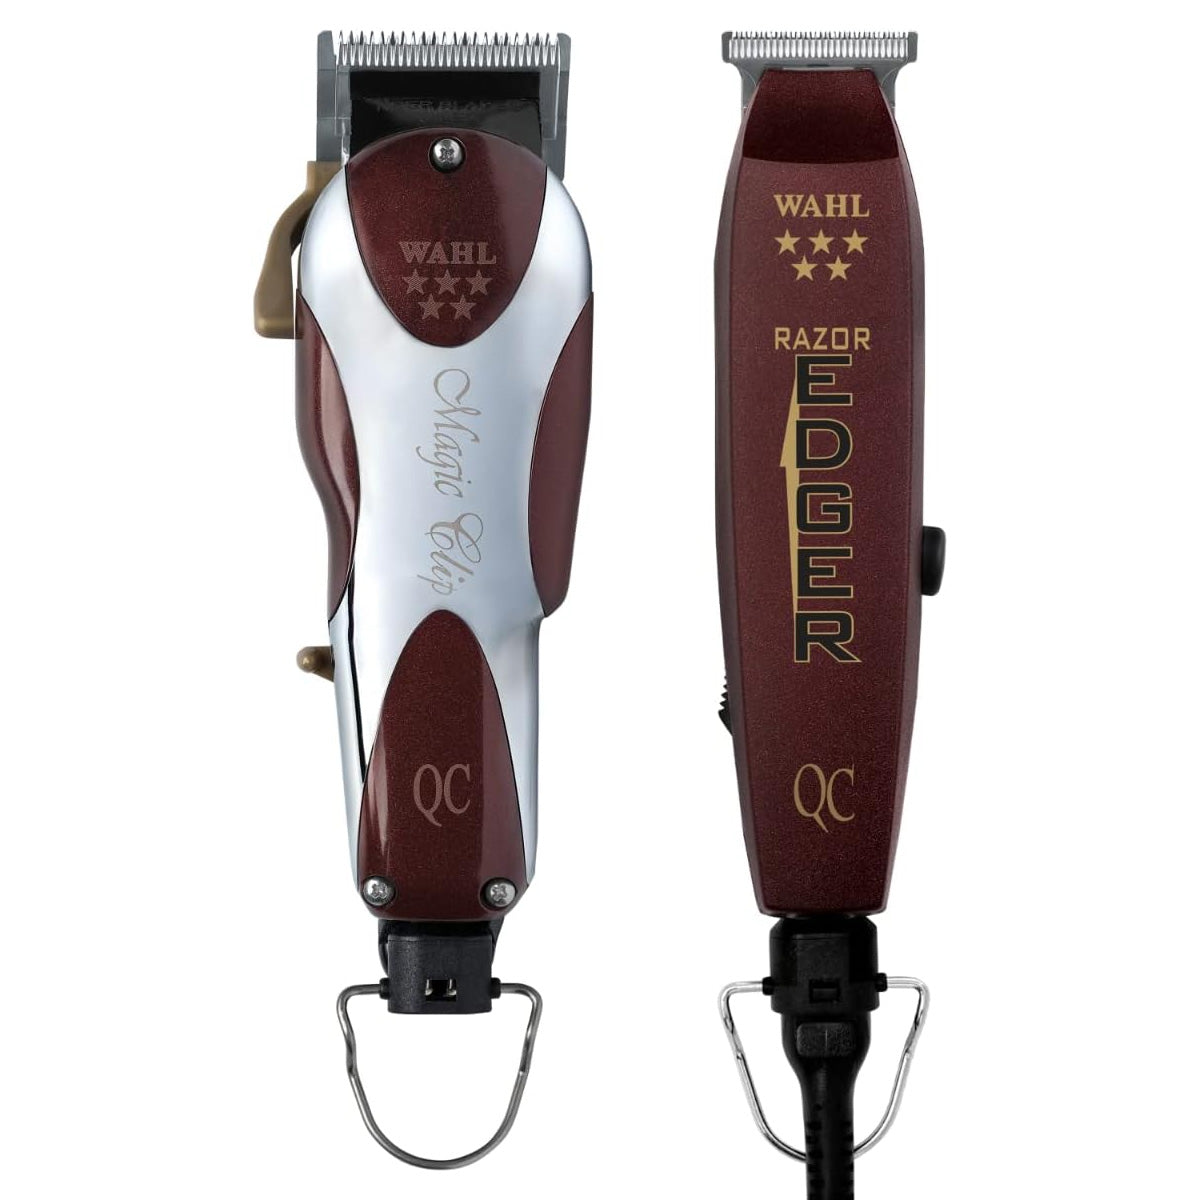 Wahl Professional 5 Star Unicord Combo 8242